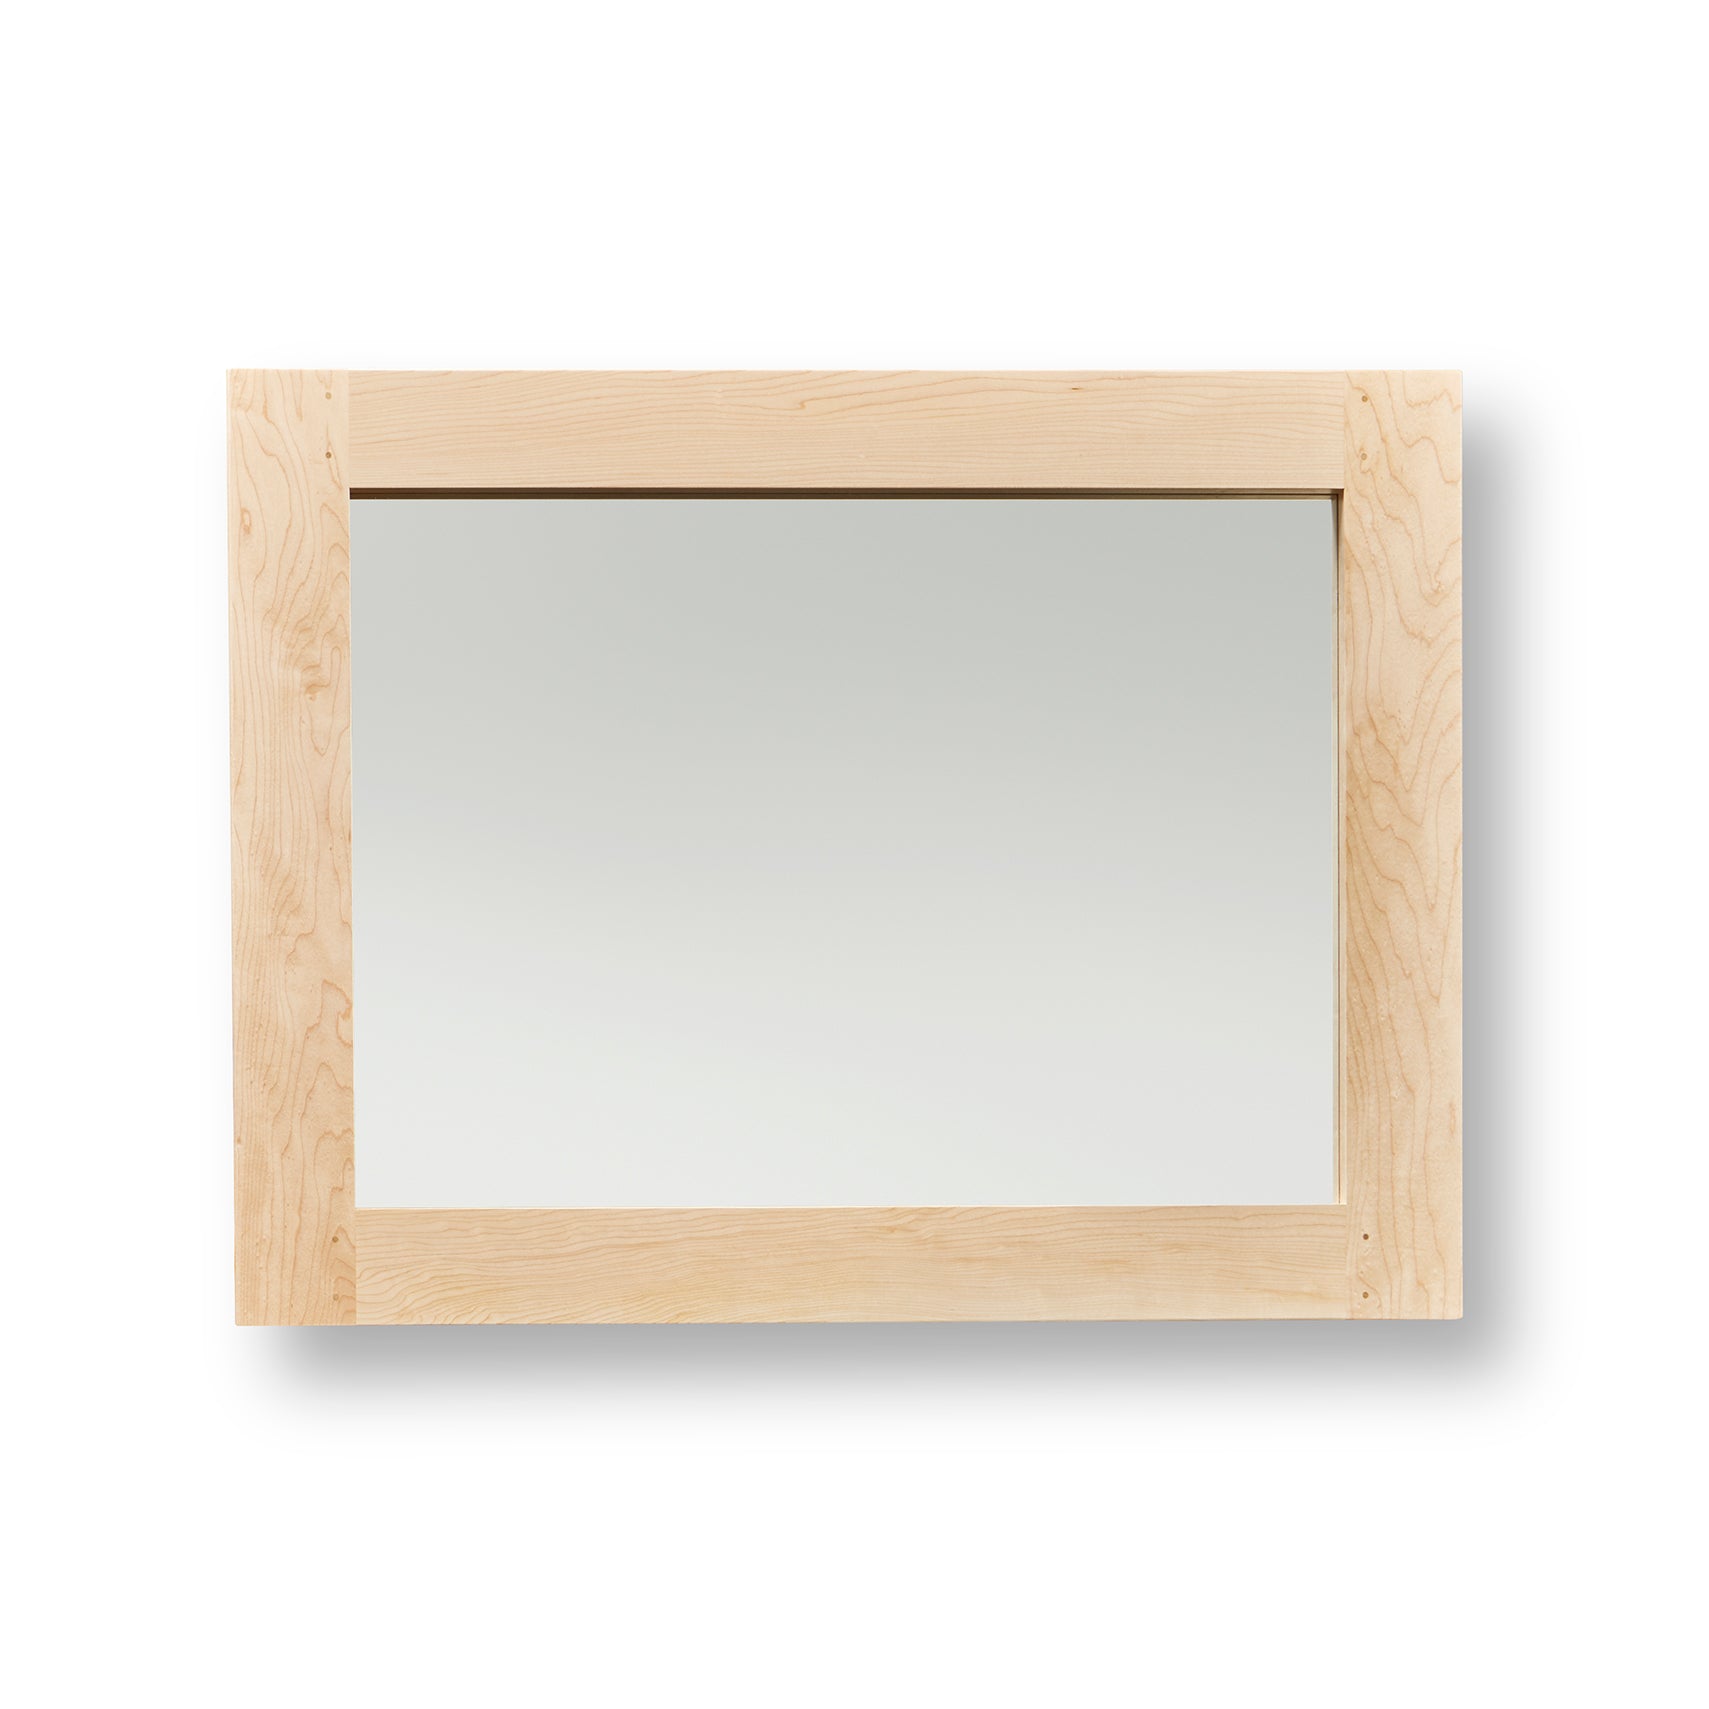 Wall mirror with maple wood frame